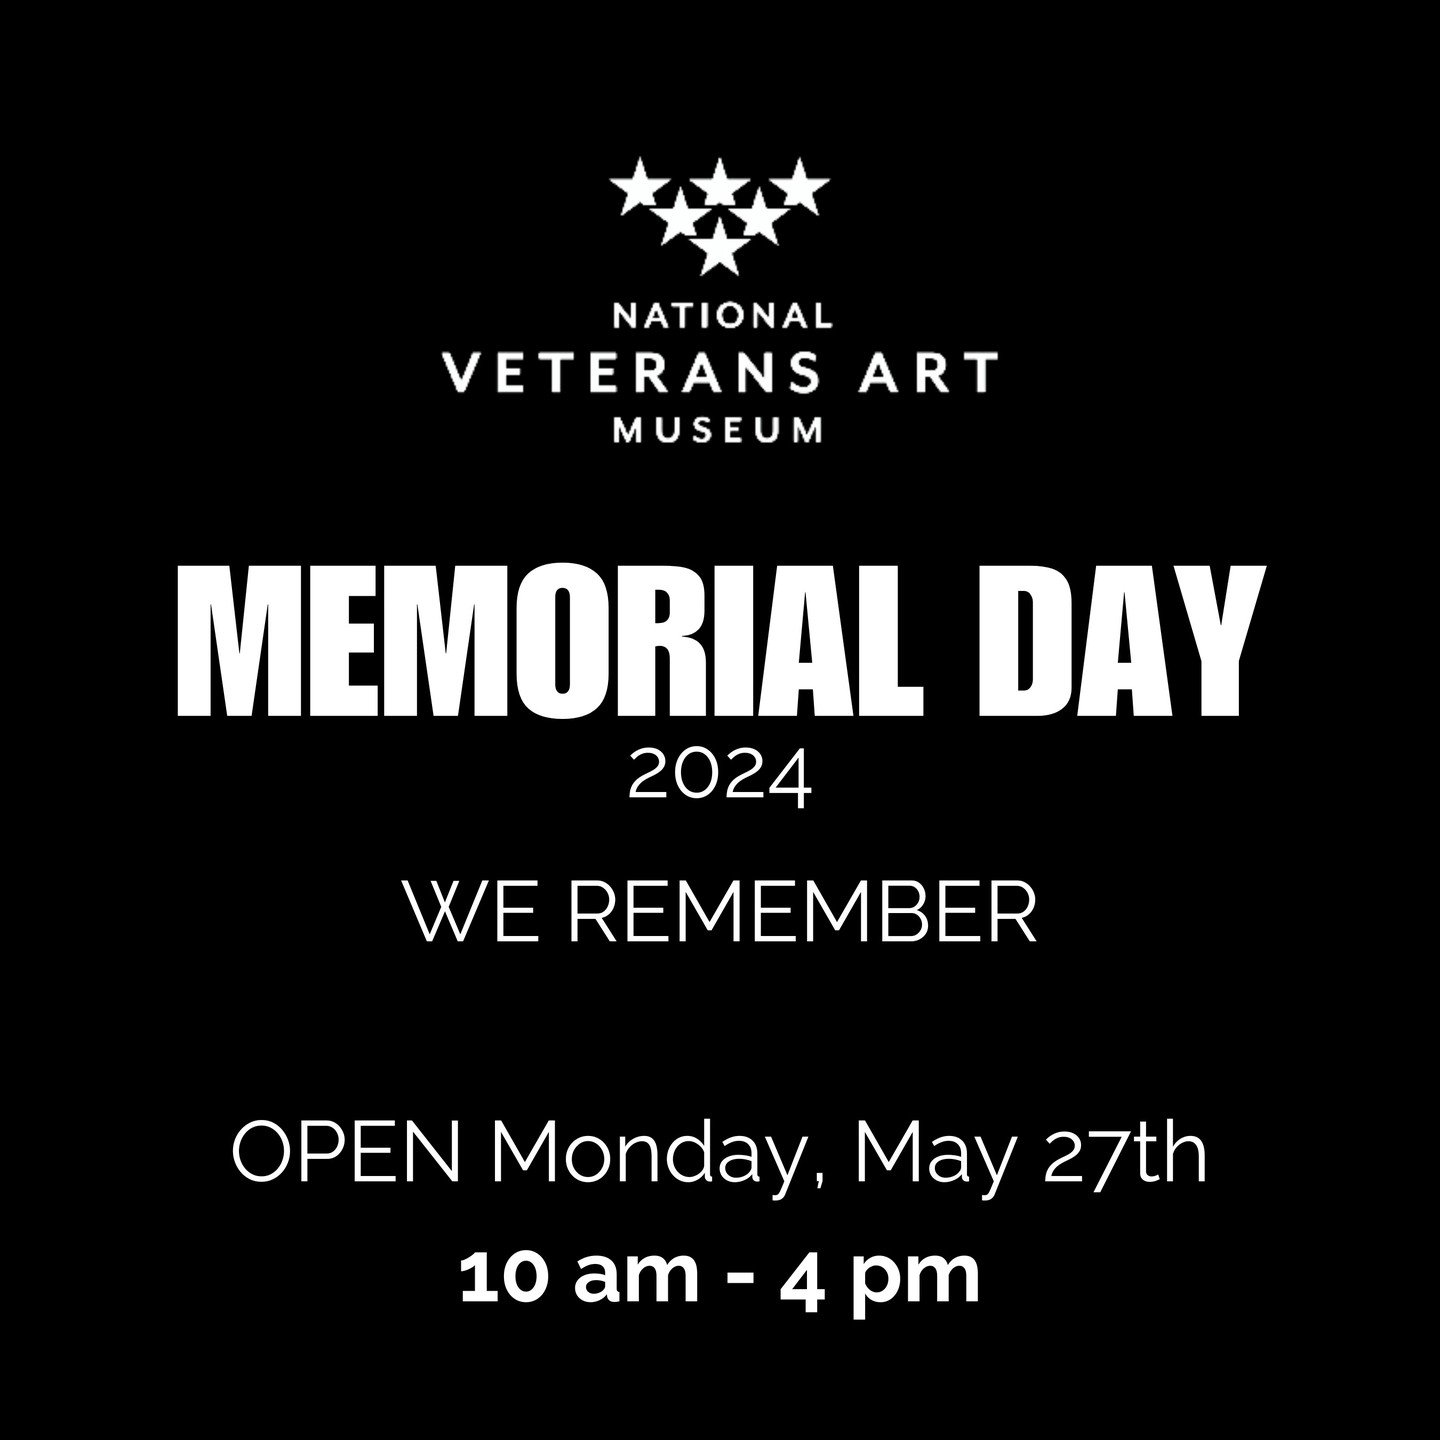 Looking for a space to connect with the true meaning of Memorial Day? Join us on Monday for art making in community as we open for special extended hours on Monday, May 27th from 10 am to 4 pm. #weremember #memorialday #memorialdayweekend